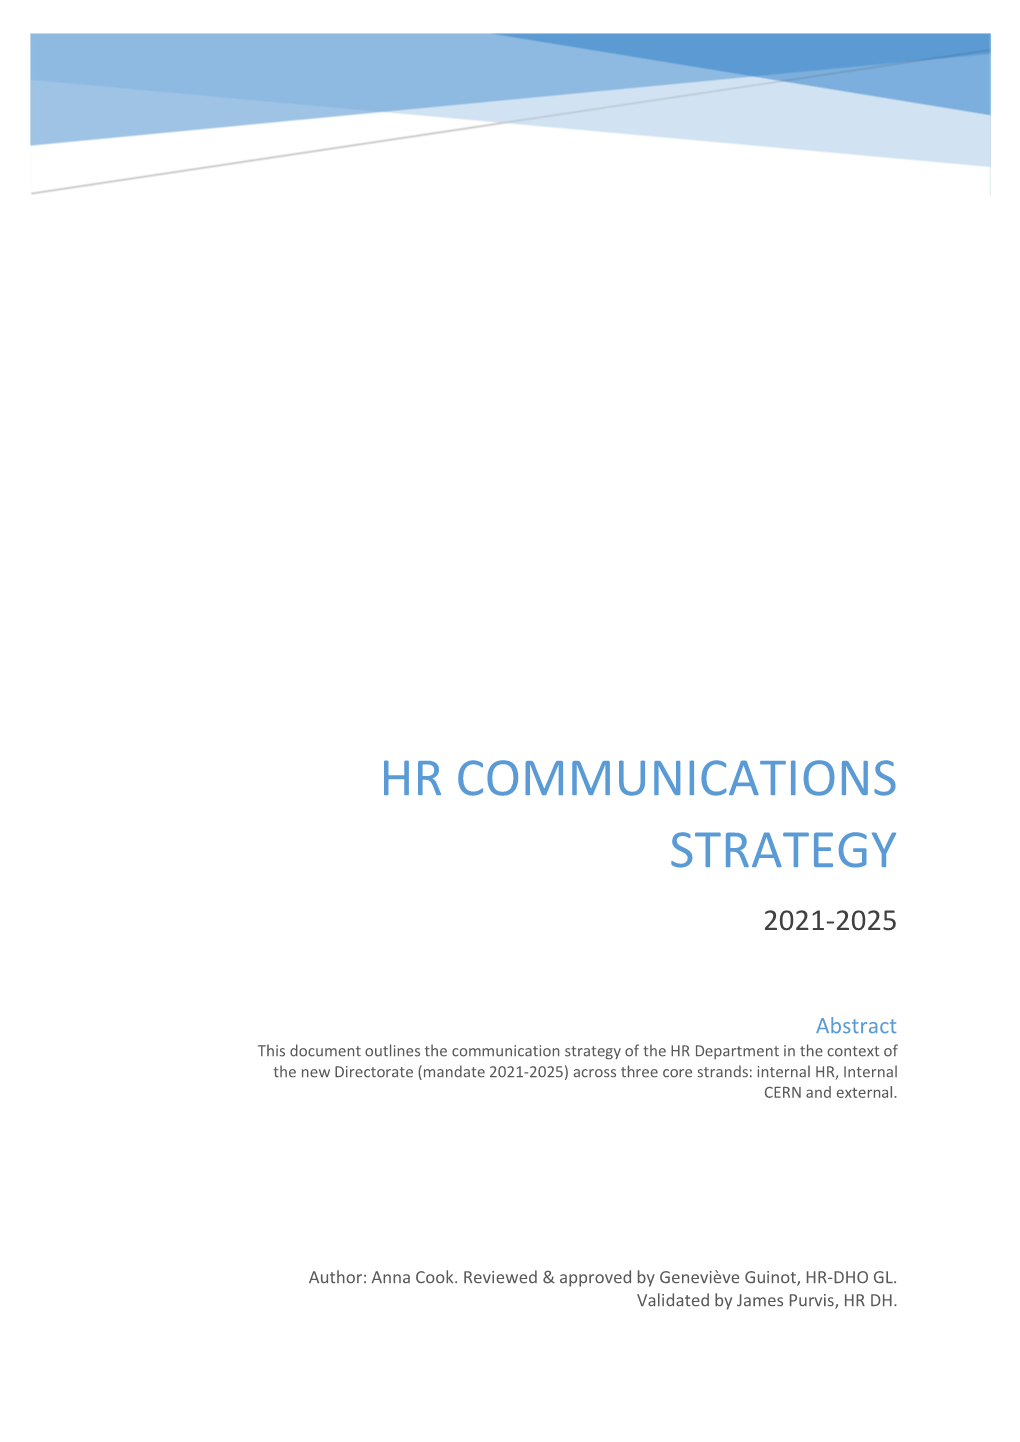 Hr Communications Strategy 2021-2025